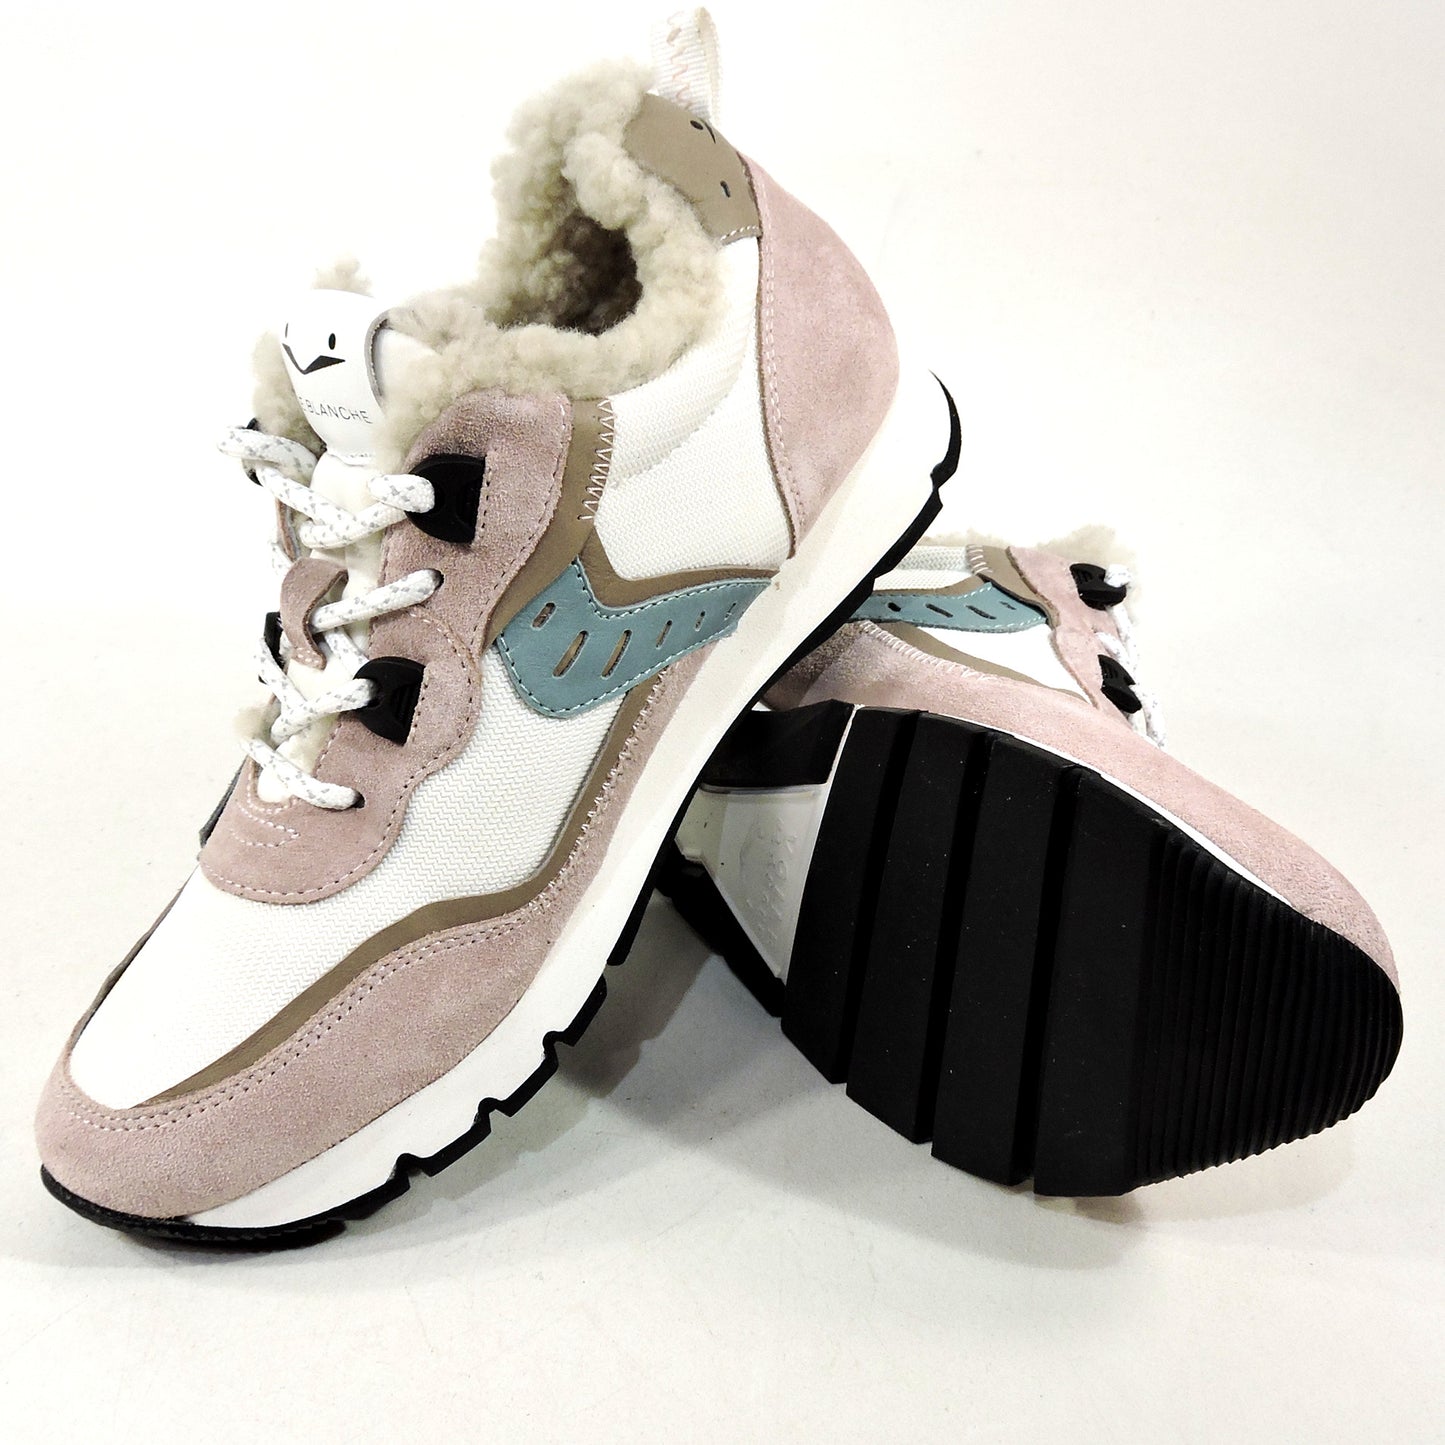 VOILE BLANCHE 🇮🇹 WOMEN'S PINK SUEDE COMFORT FASHION SNEAKERS